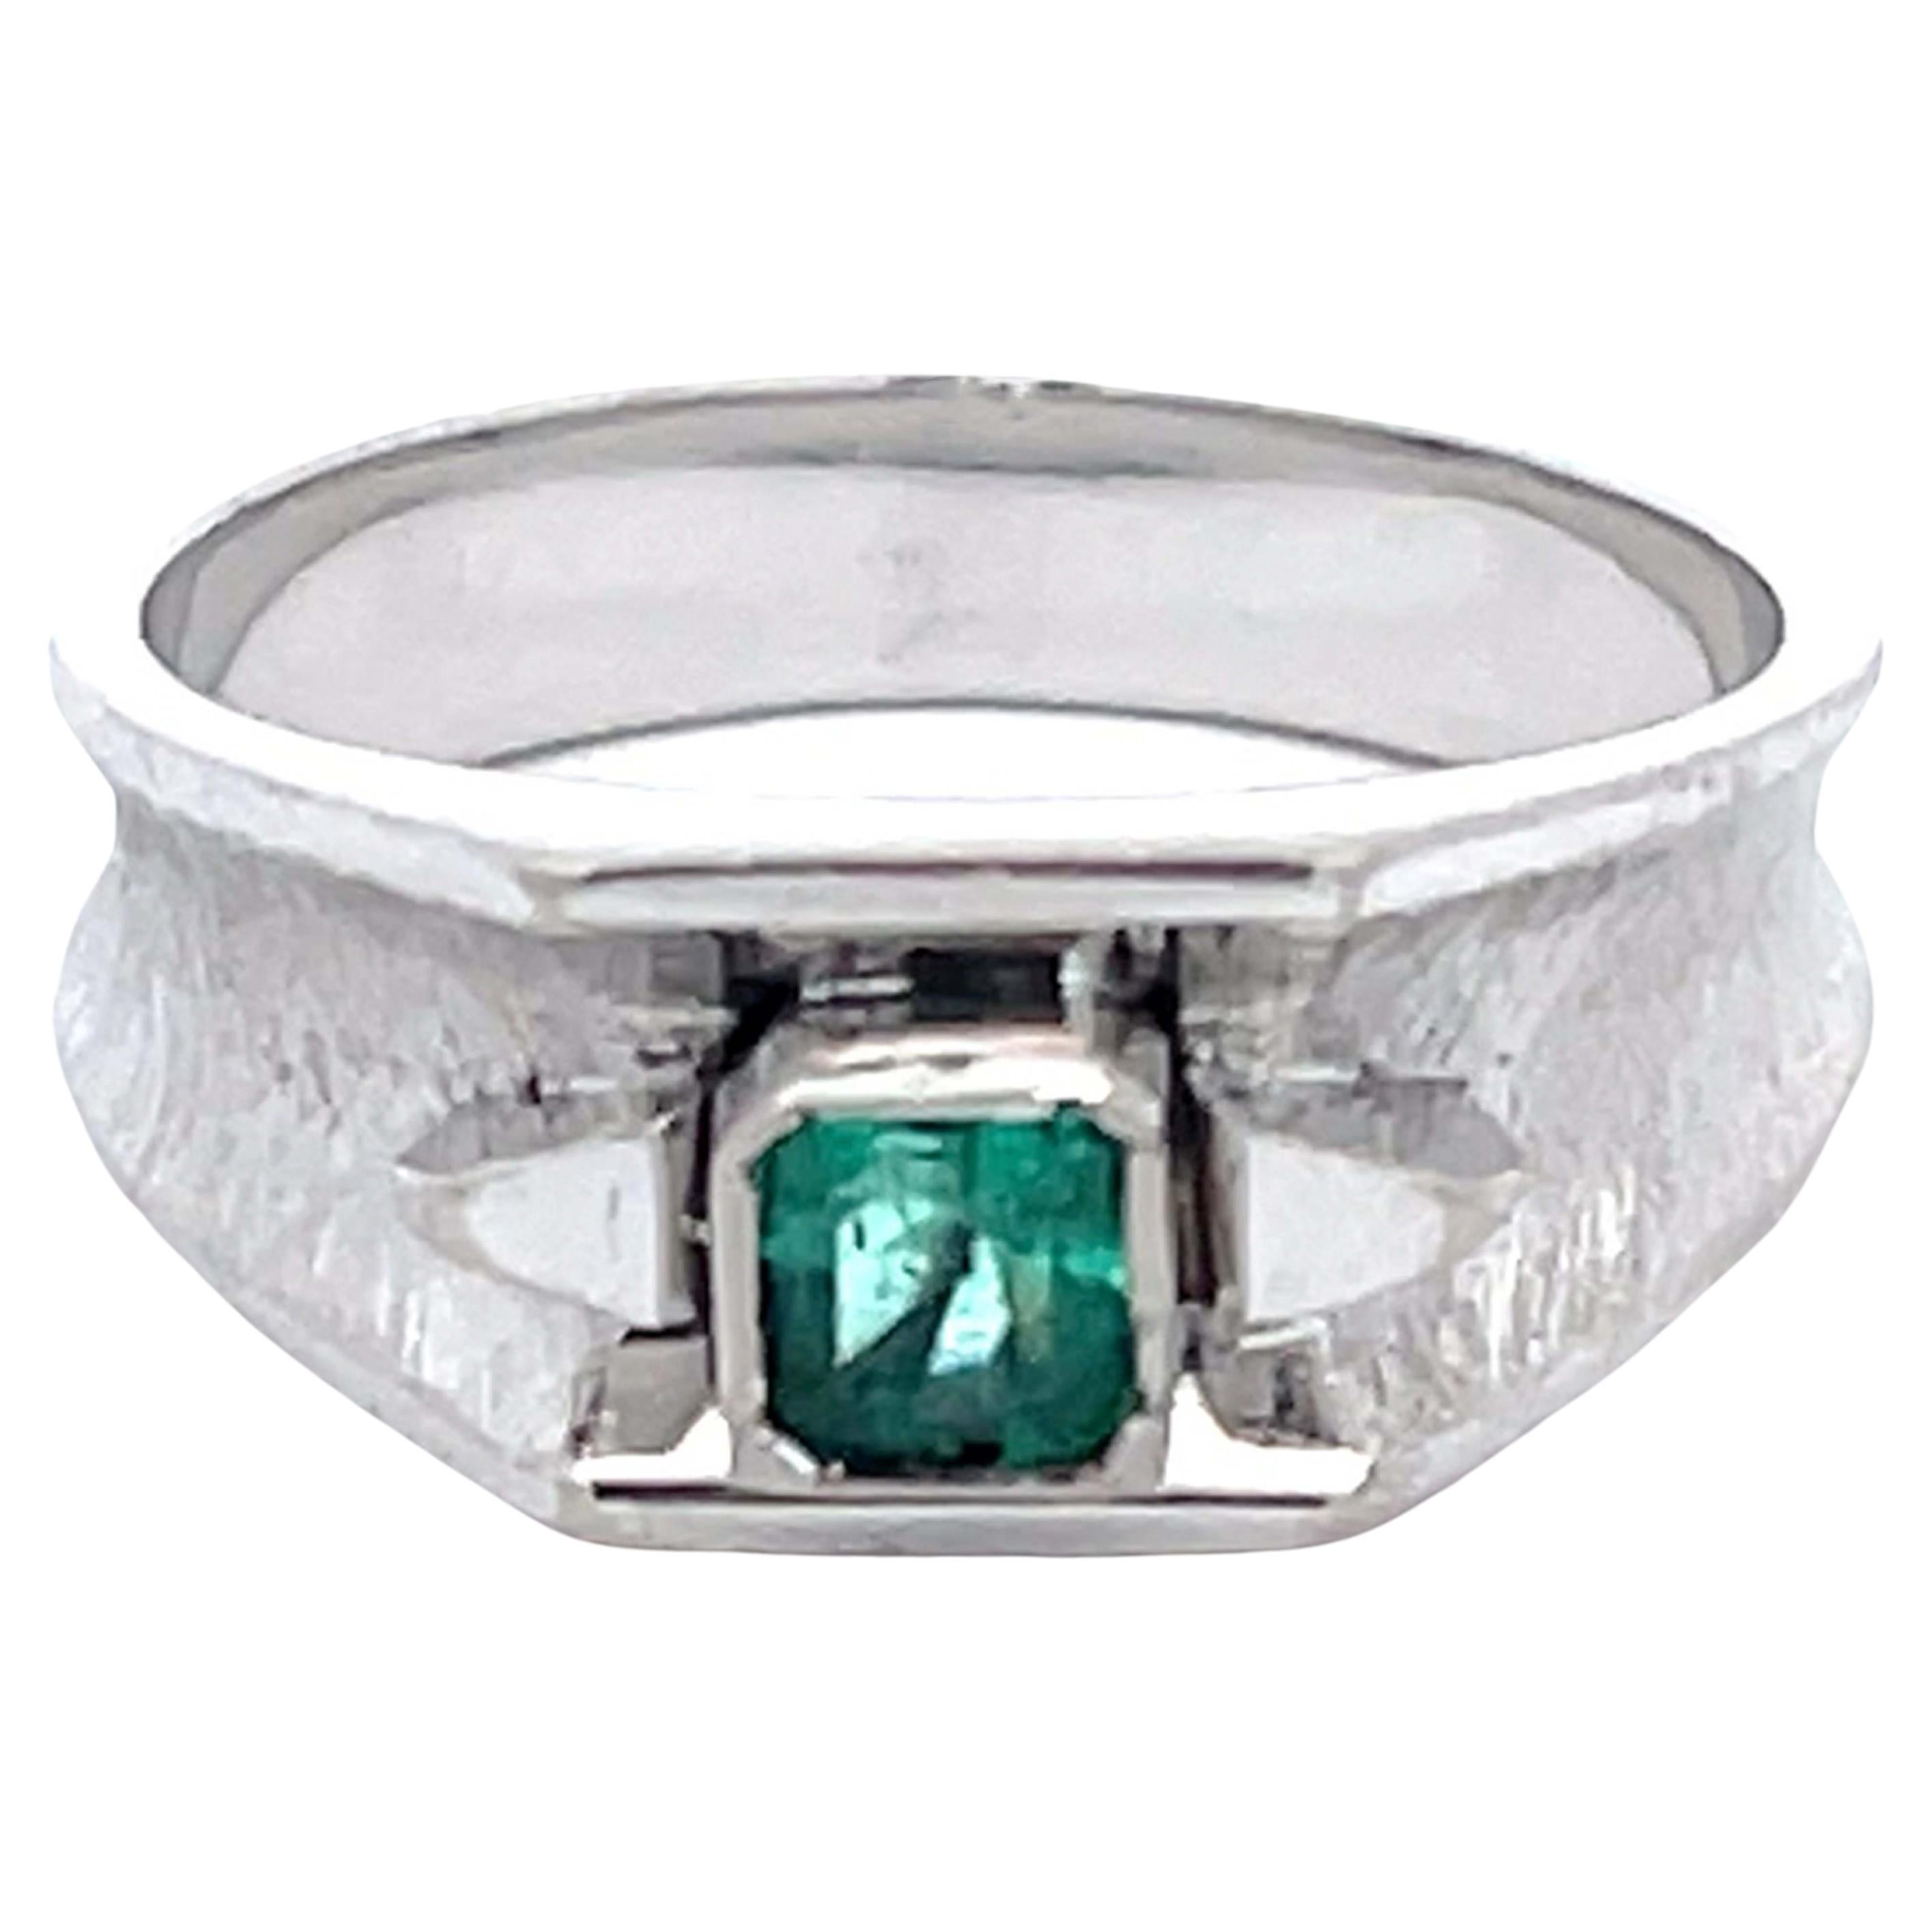 PGS Certified 7.18 Carat Columbian Emerald and Diamond Cocktail Ring in ...